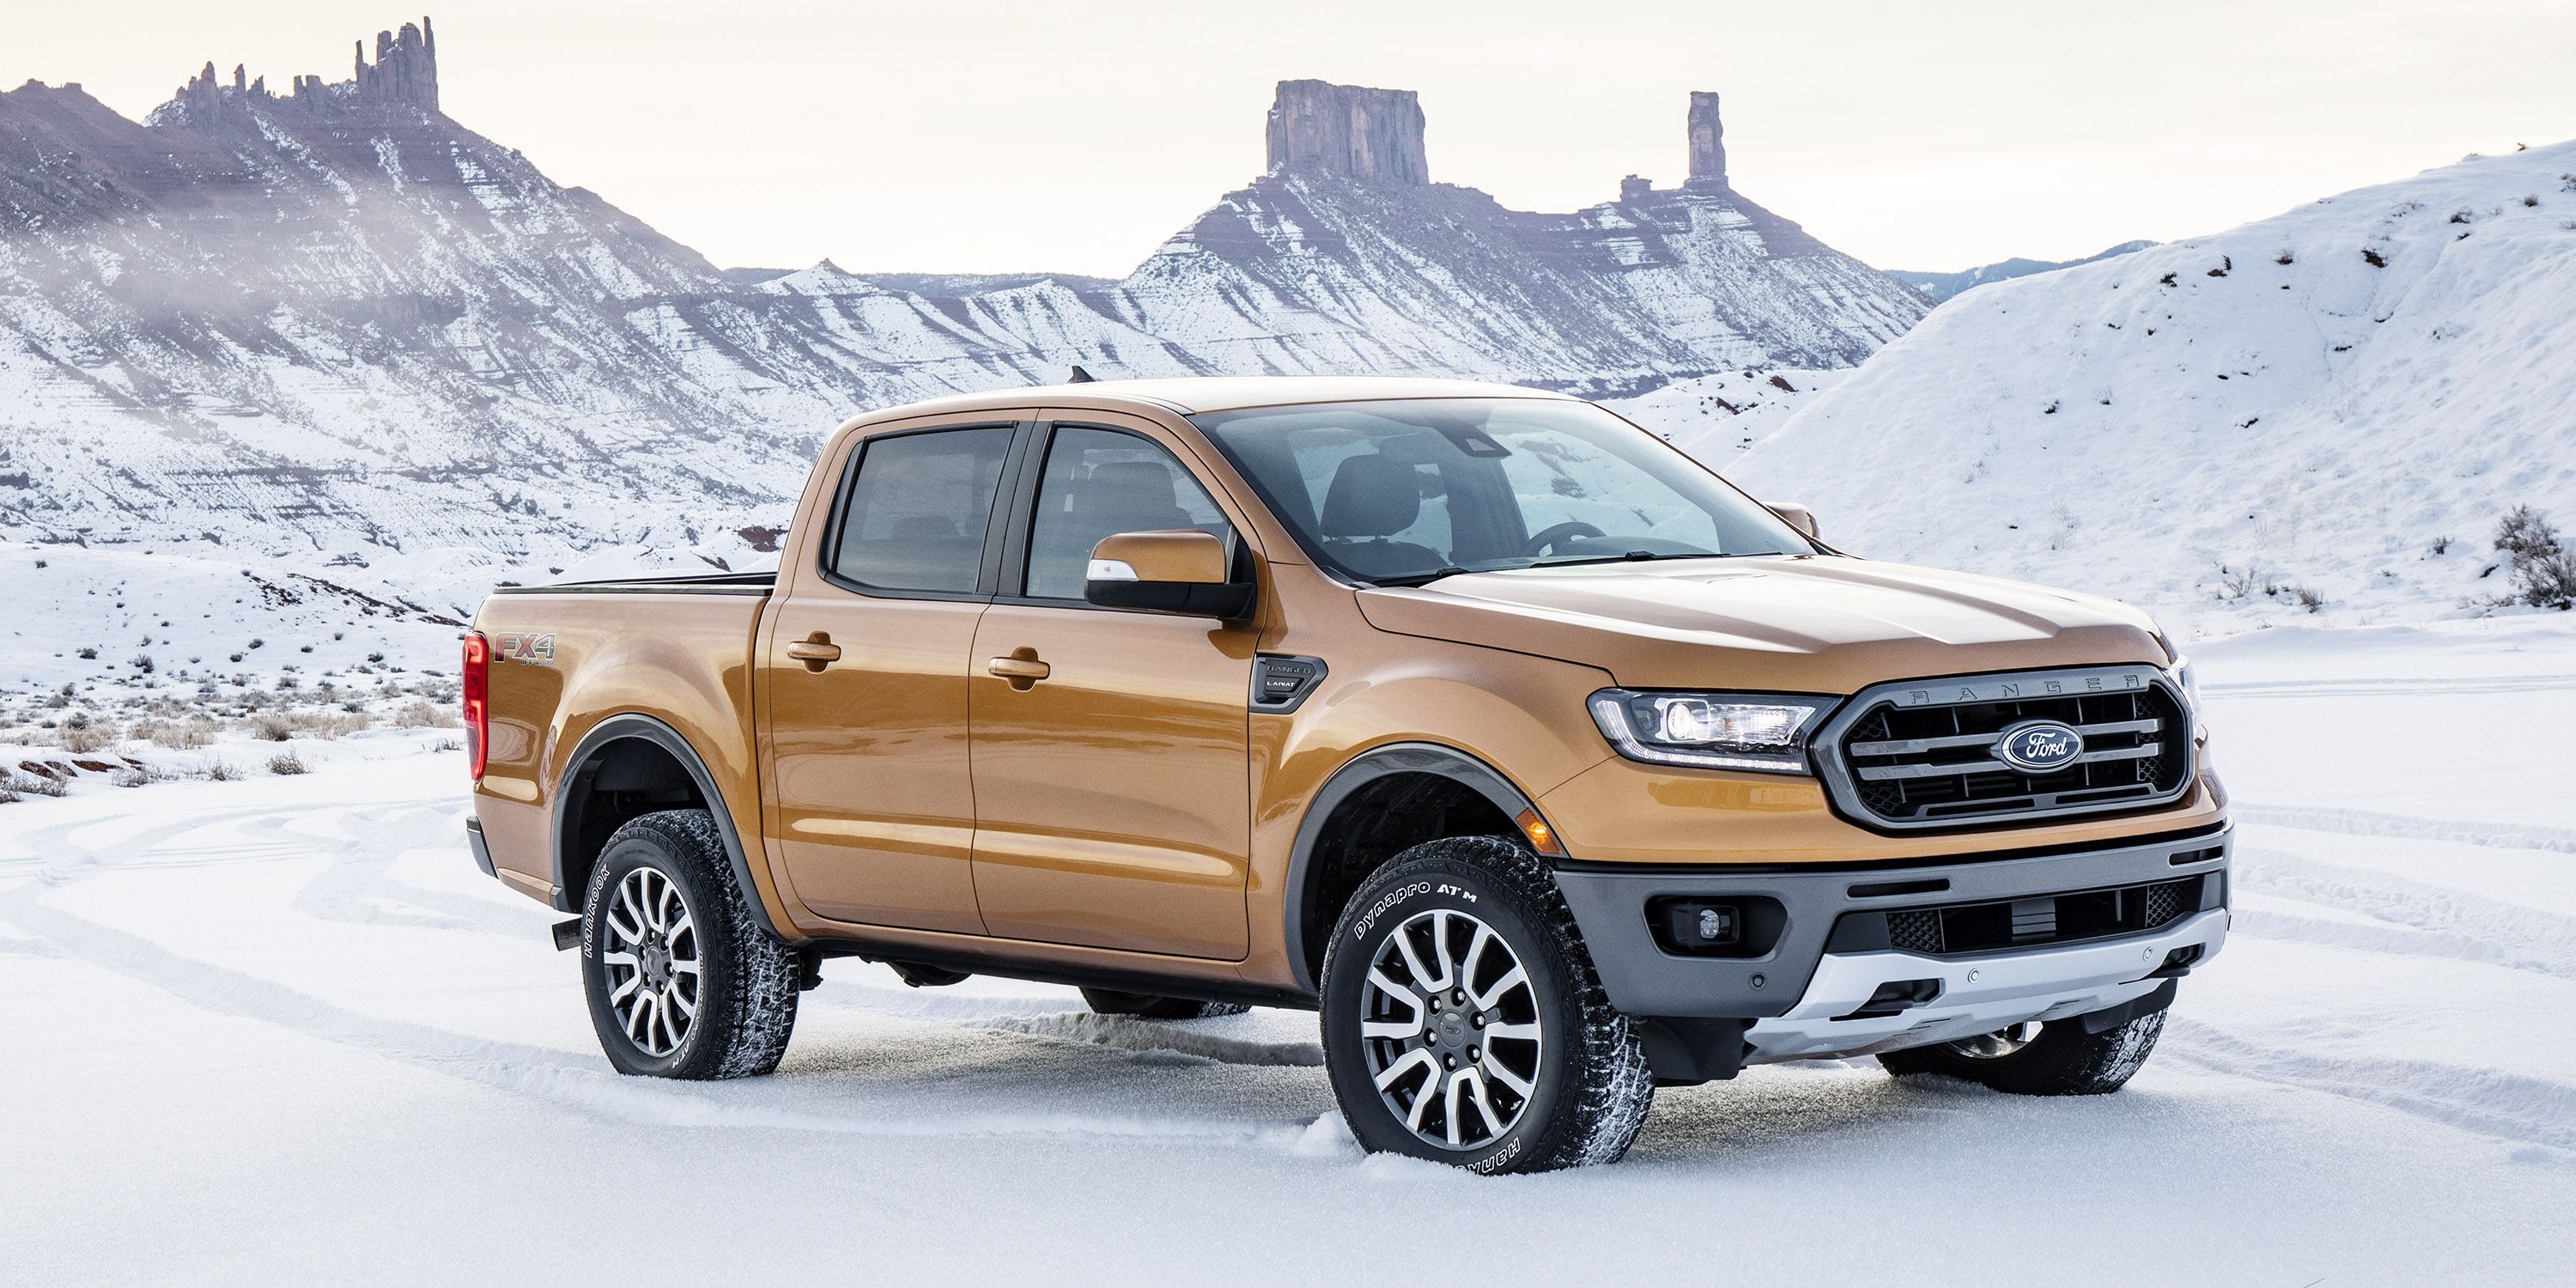 Ford Ranger News and Reviews